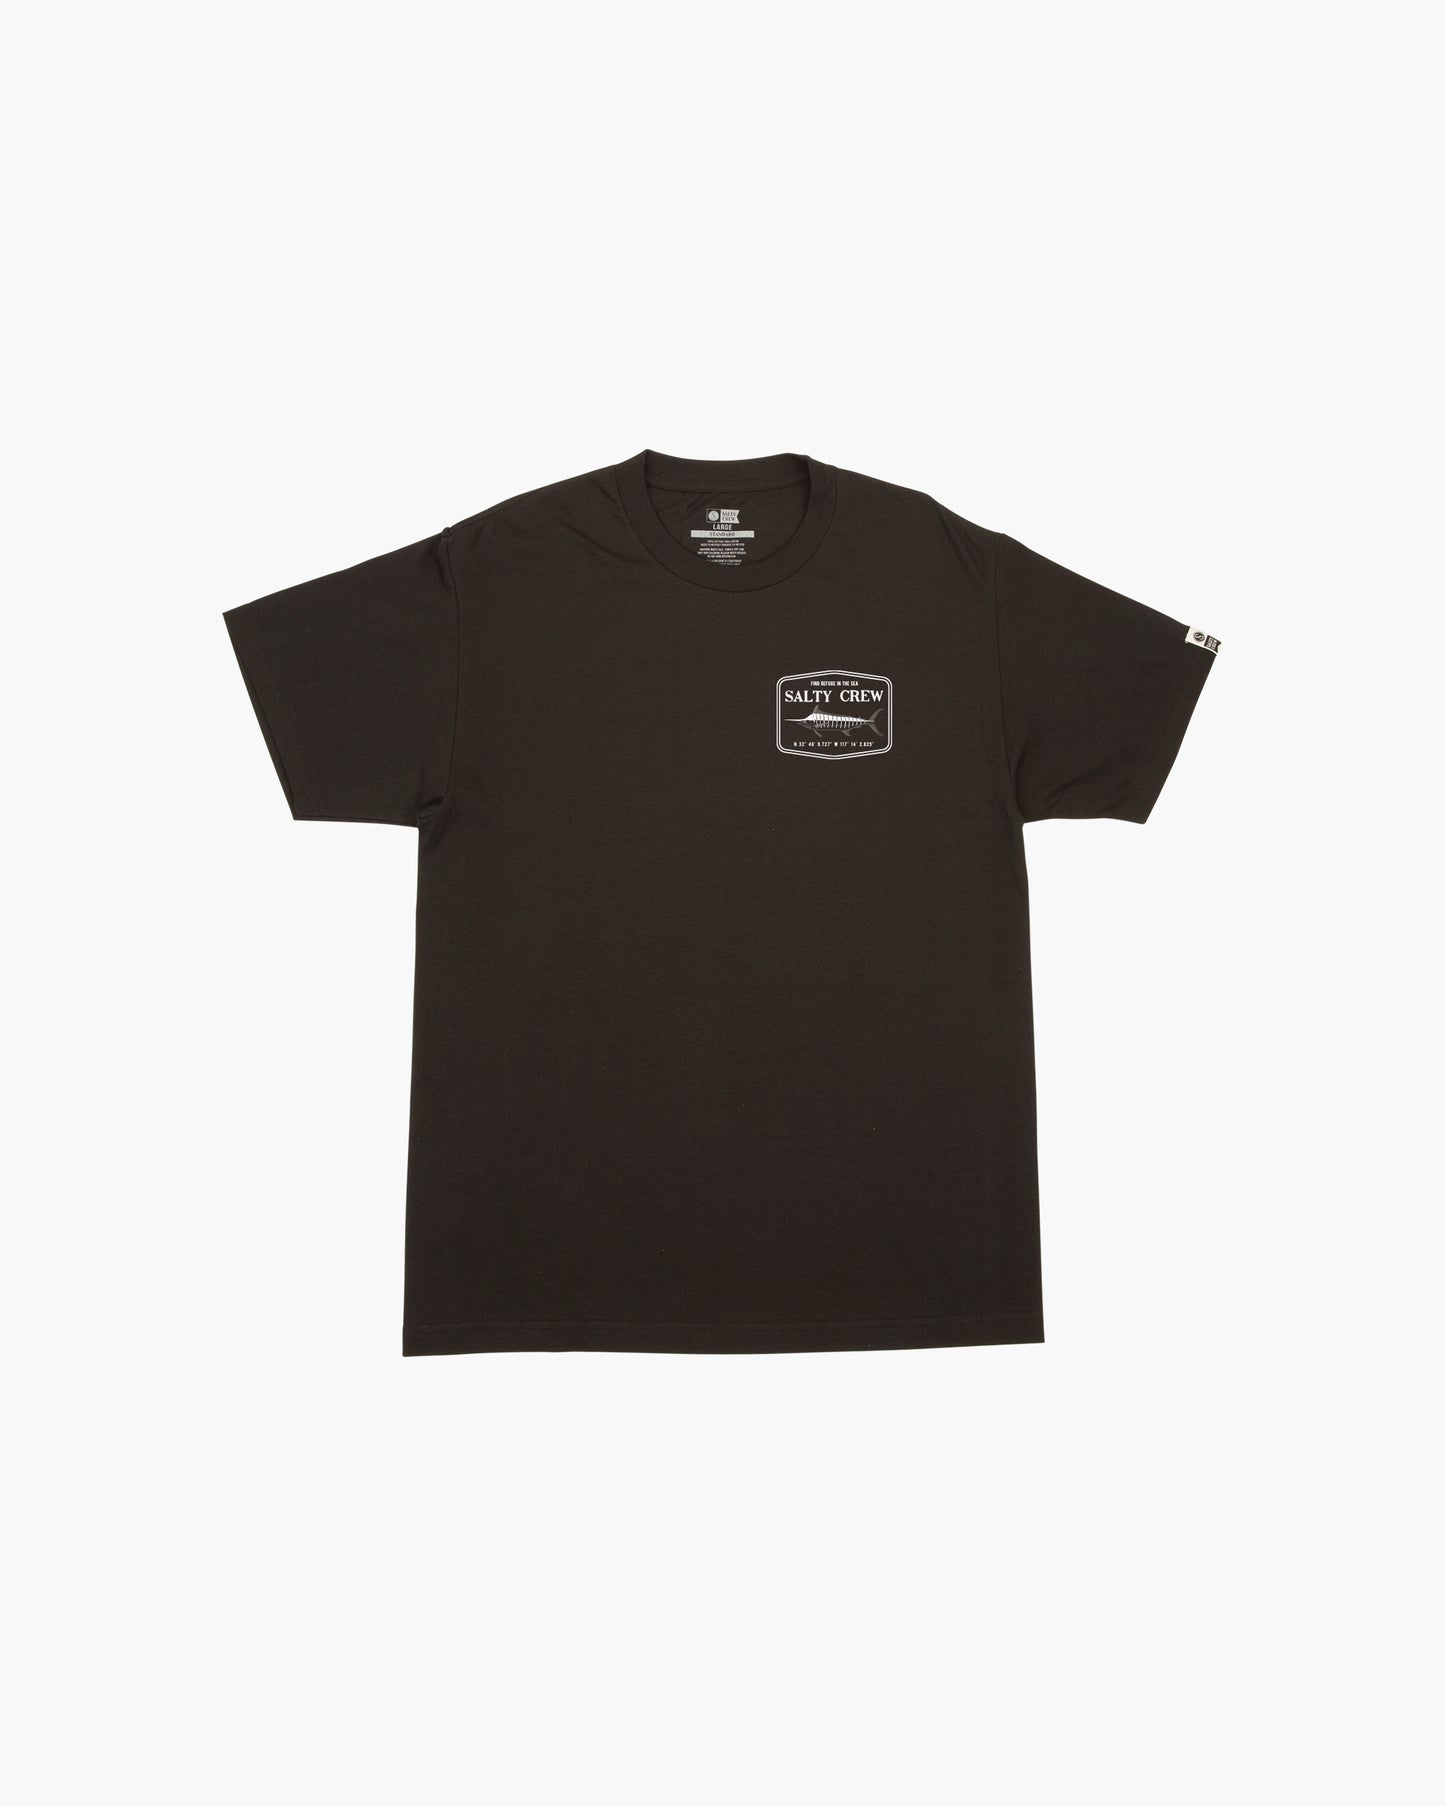 Off body front of Stealth Black S/S Standard Tee